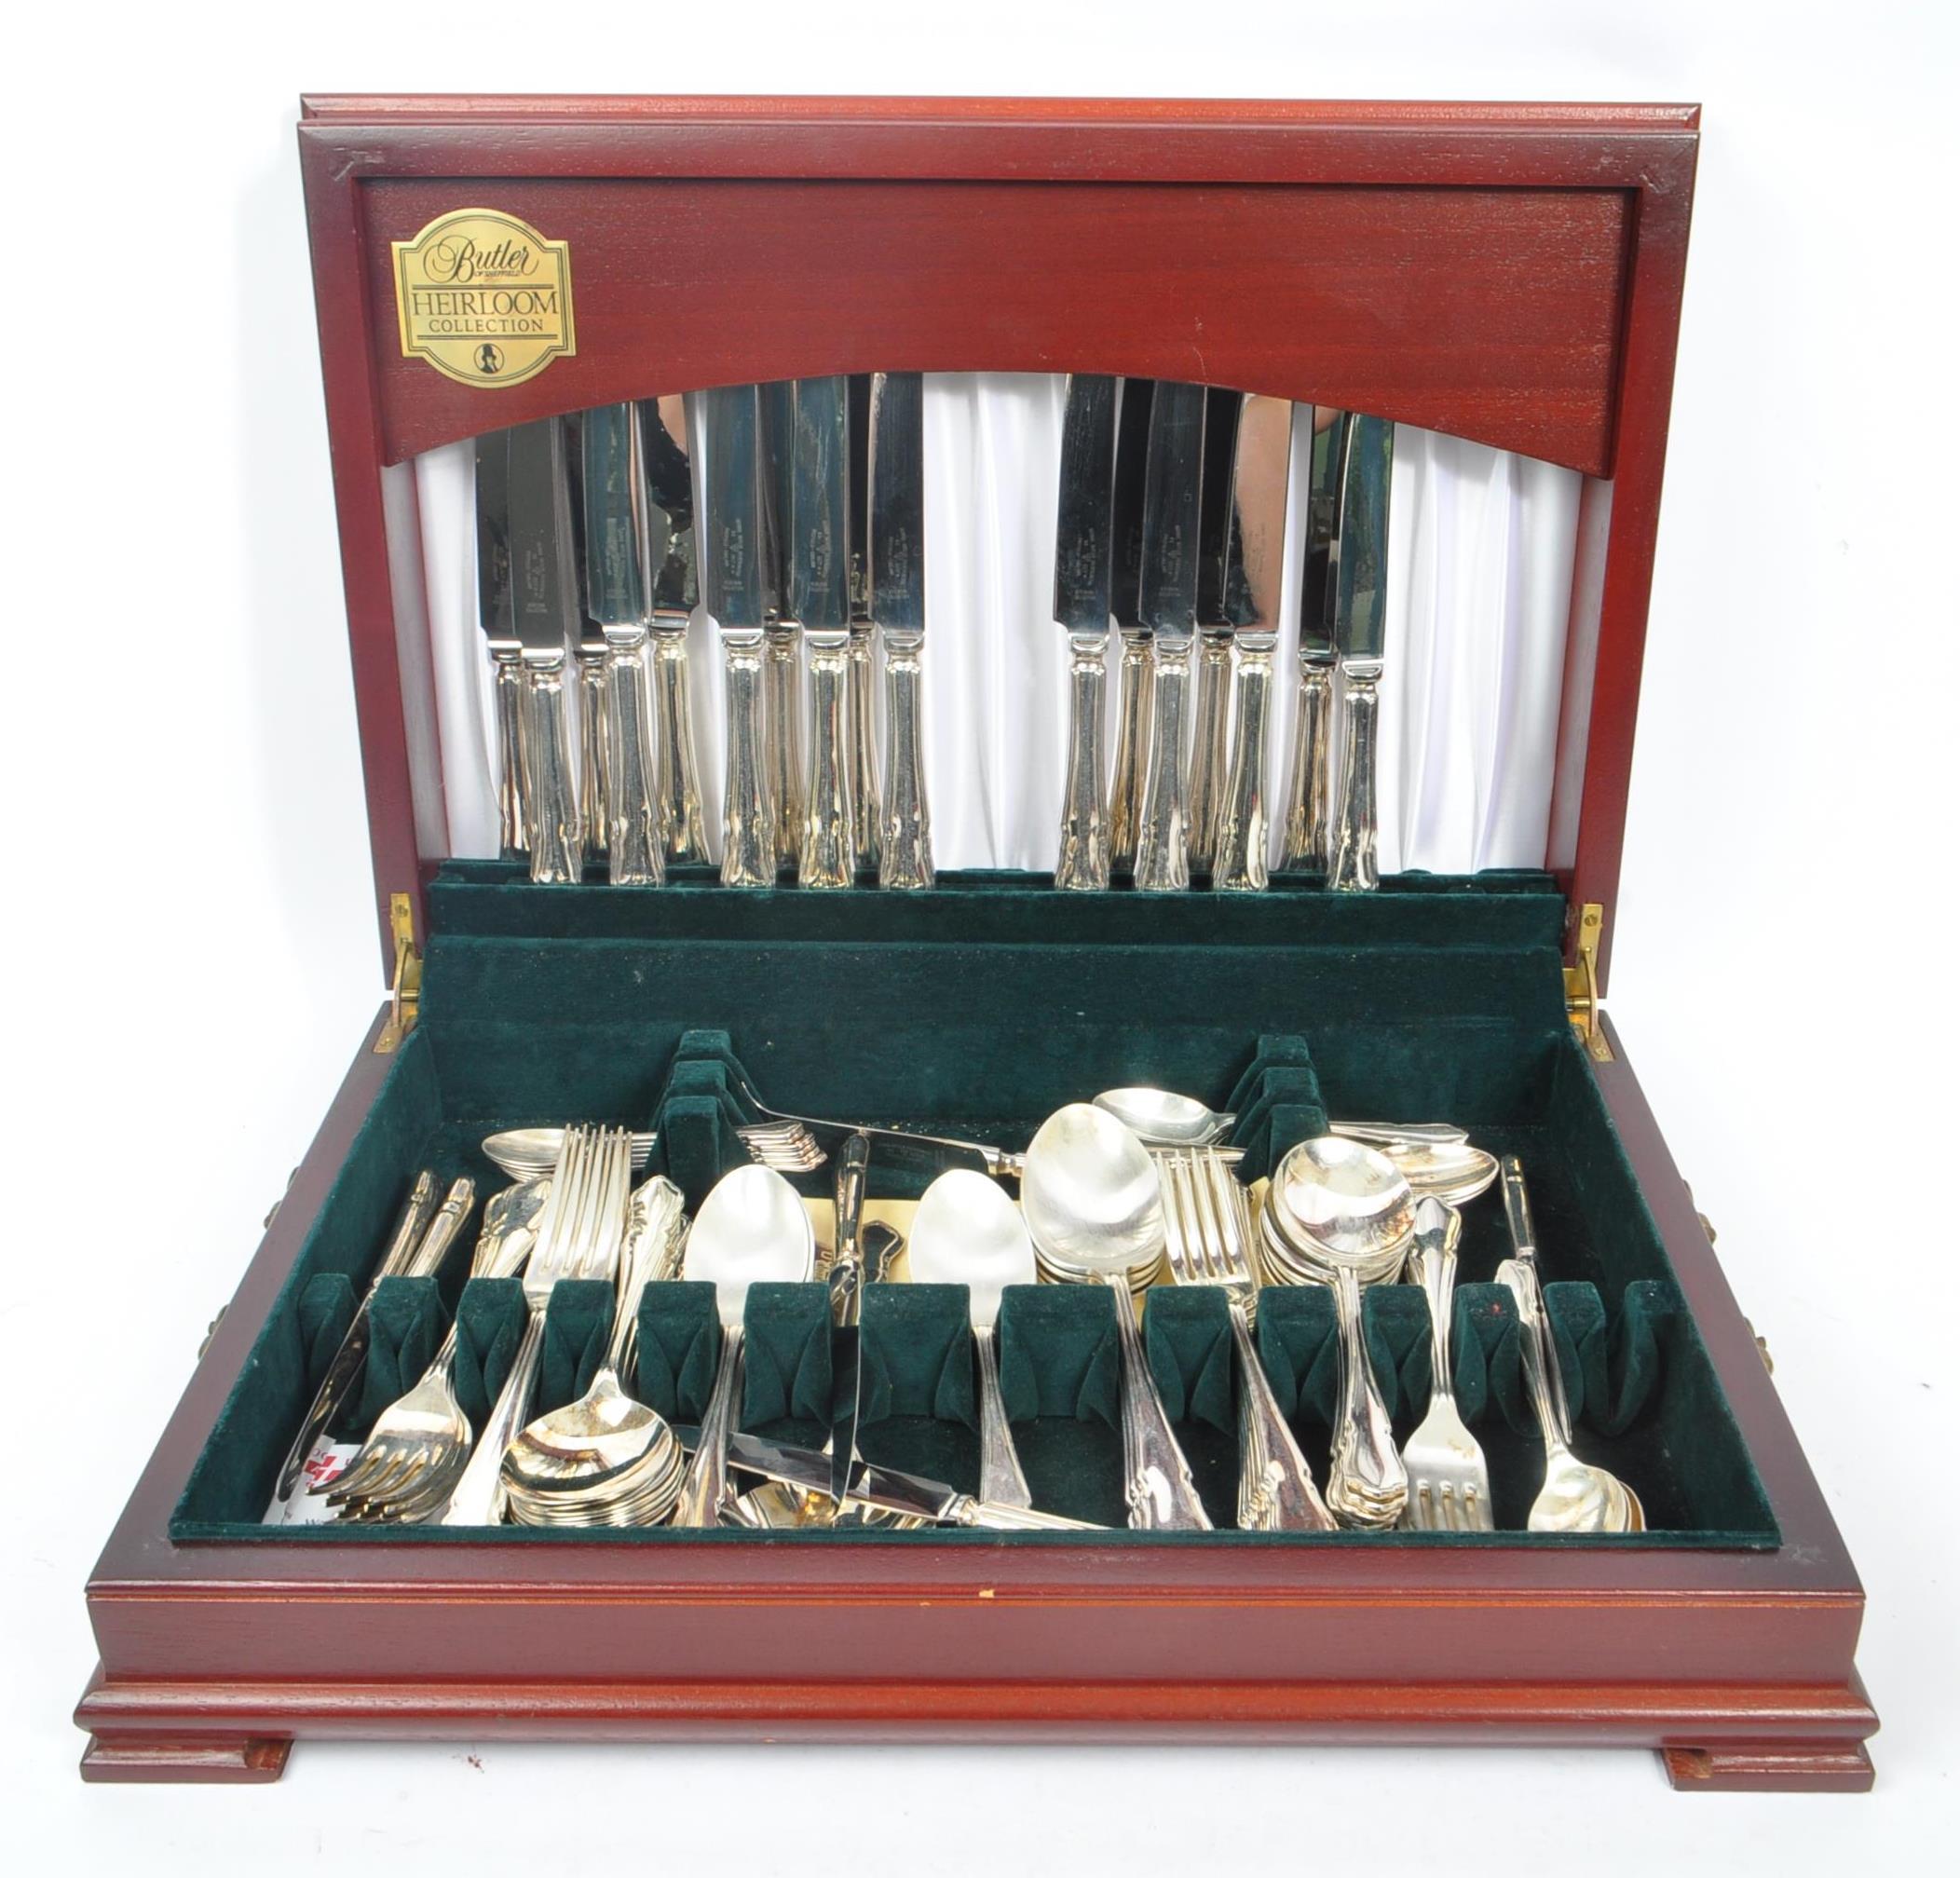 GEORGE BUTLER - HEIRLOOM COLLECTION CANTEEN OF CUTLERY